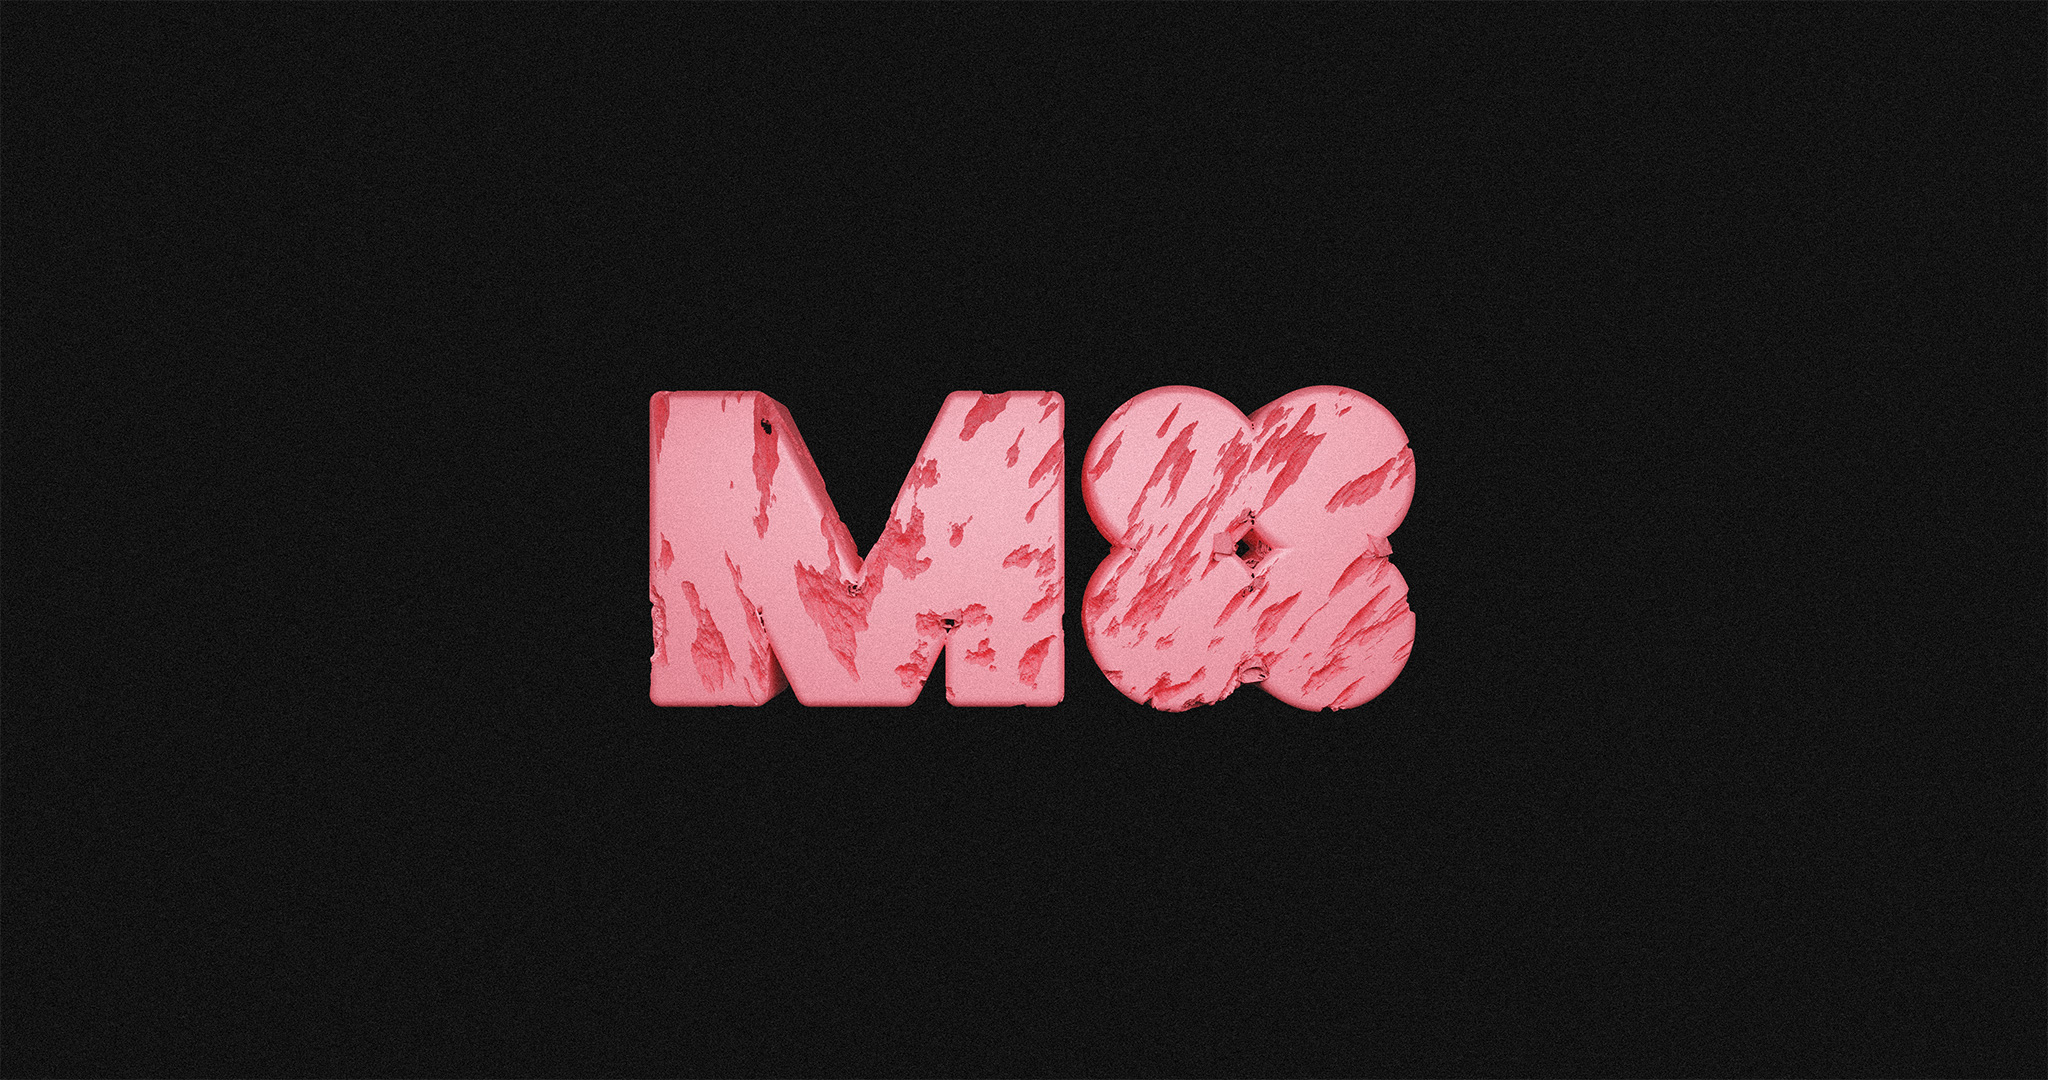 3D render of the M4 Music logotype in scratched and weathered, pink-colored plastic material.